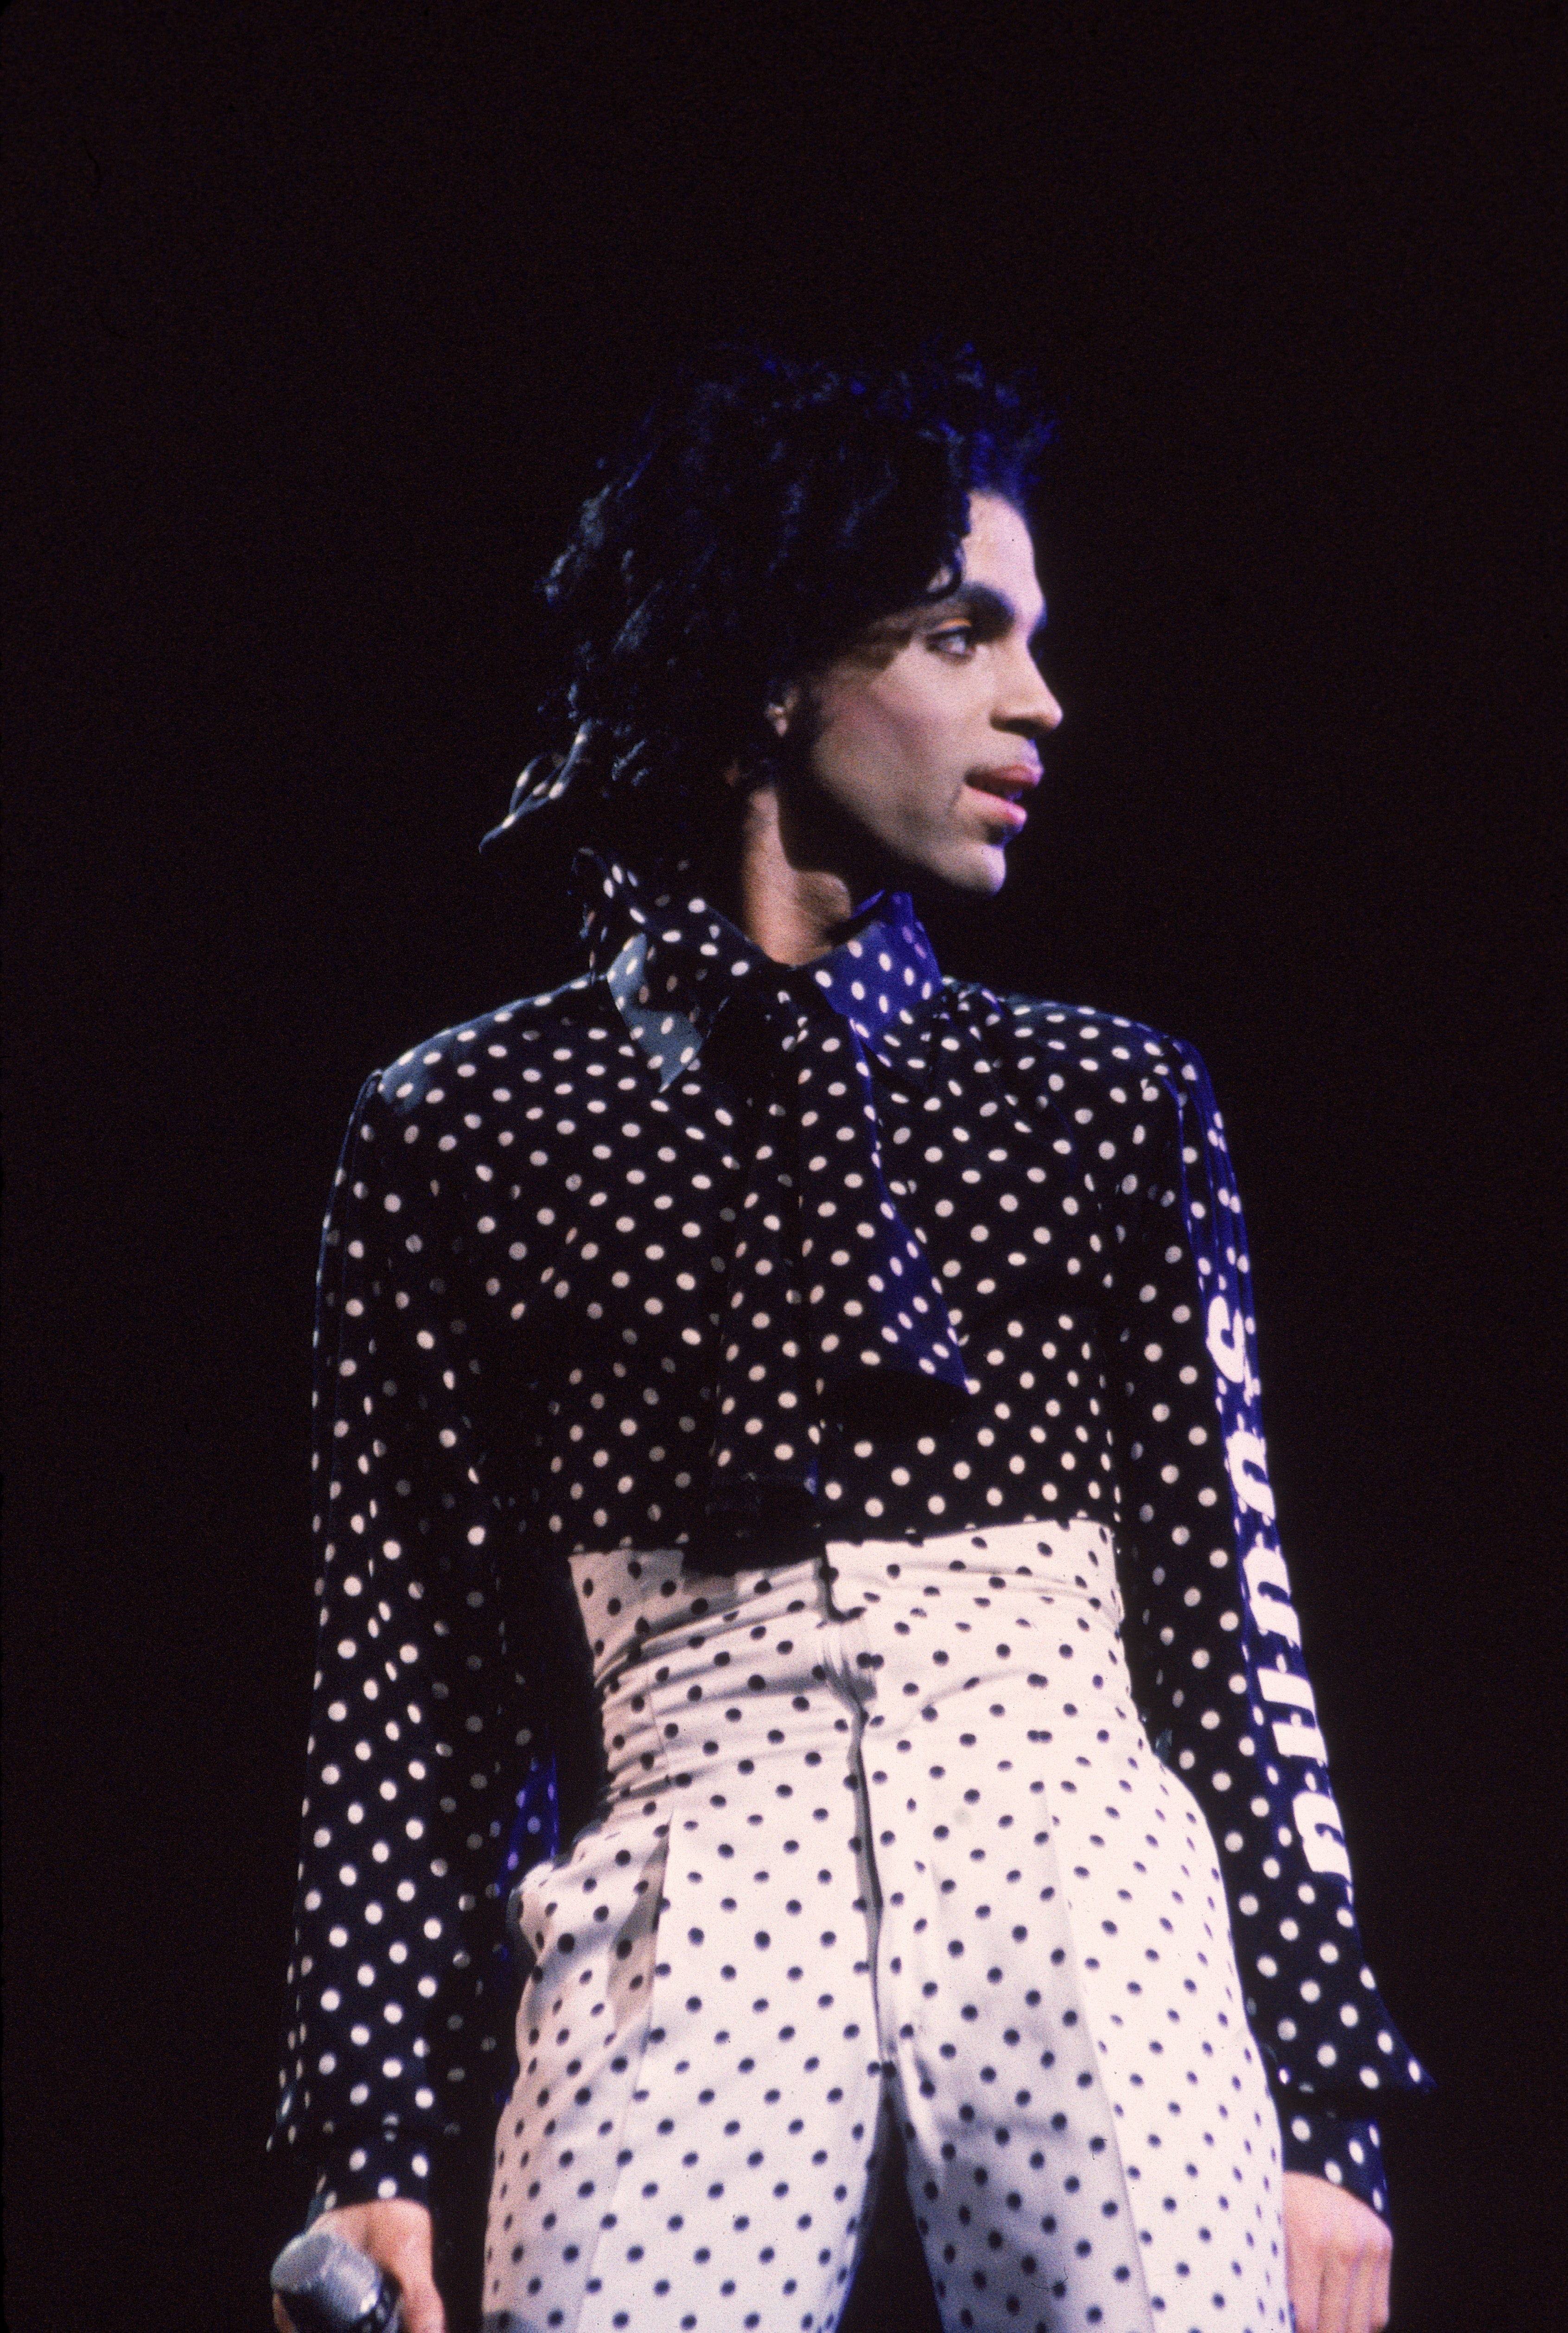 Prince's Most Iconic Fashion Moments
